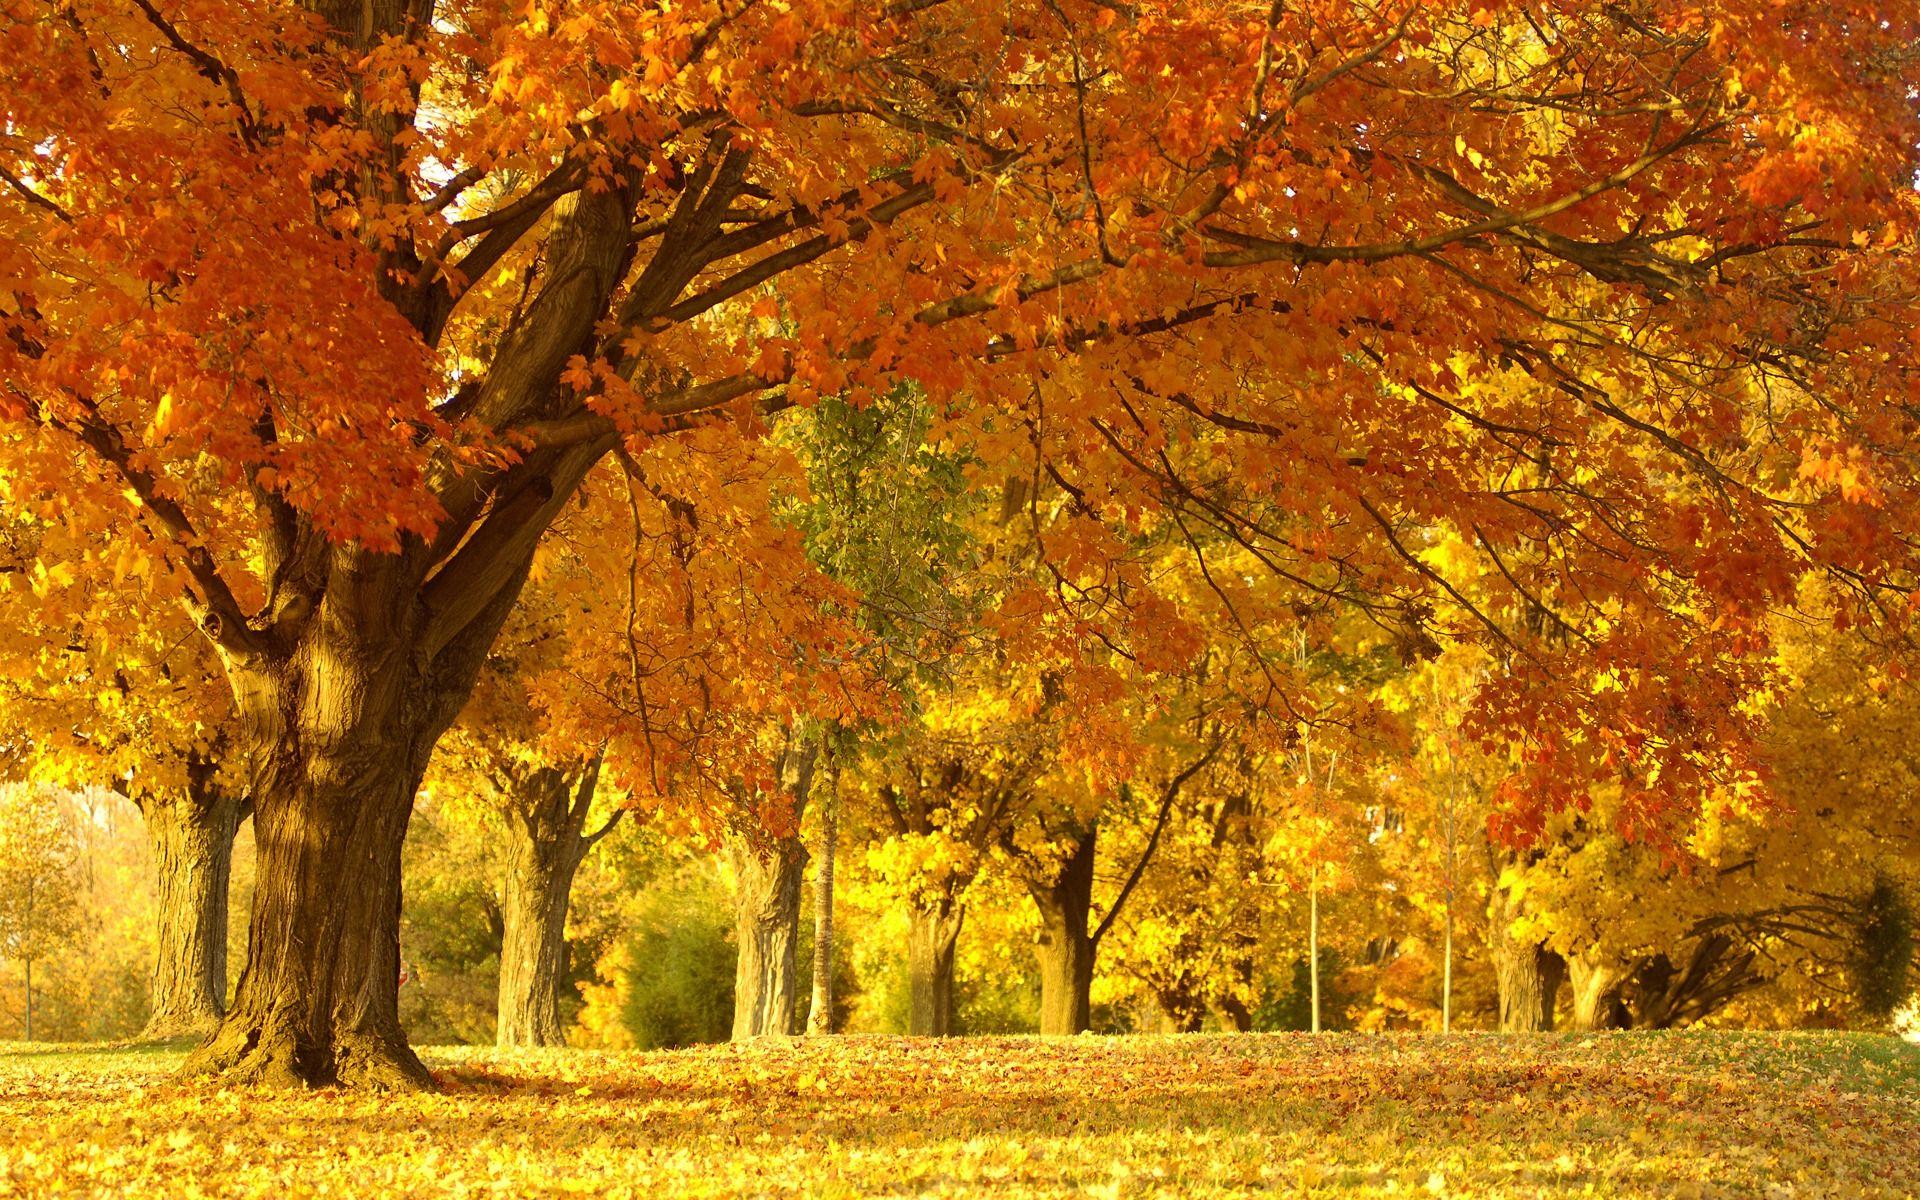 Nature wallpaper autumn trees wallpaper for free download about